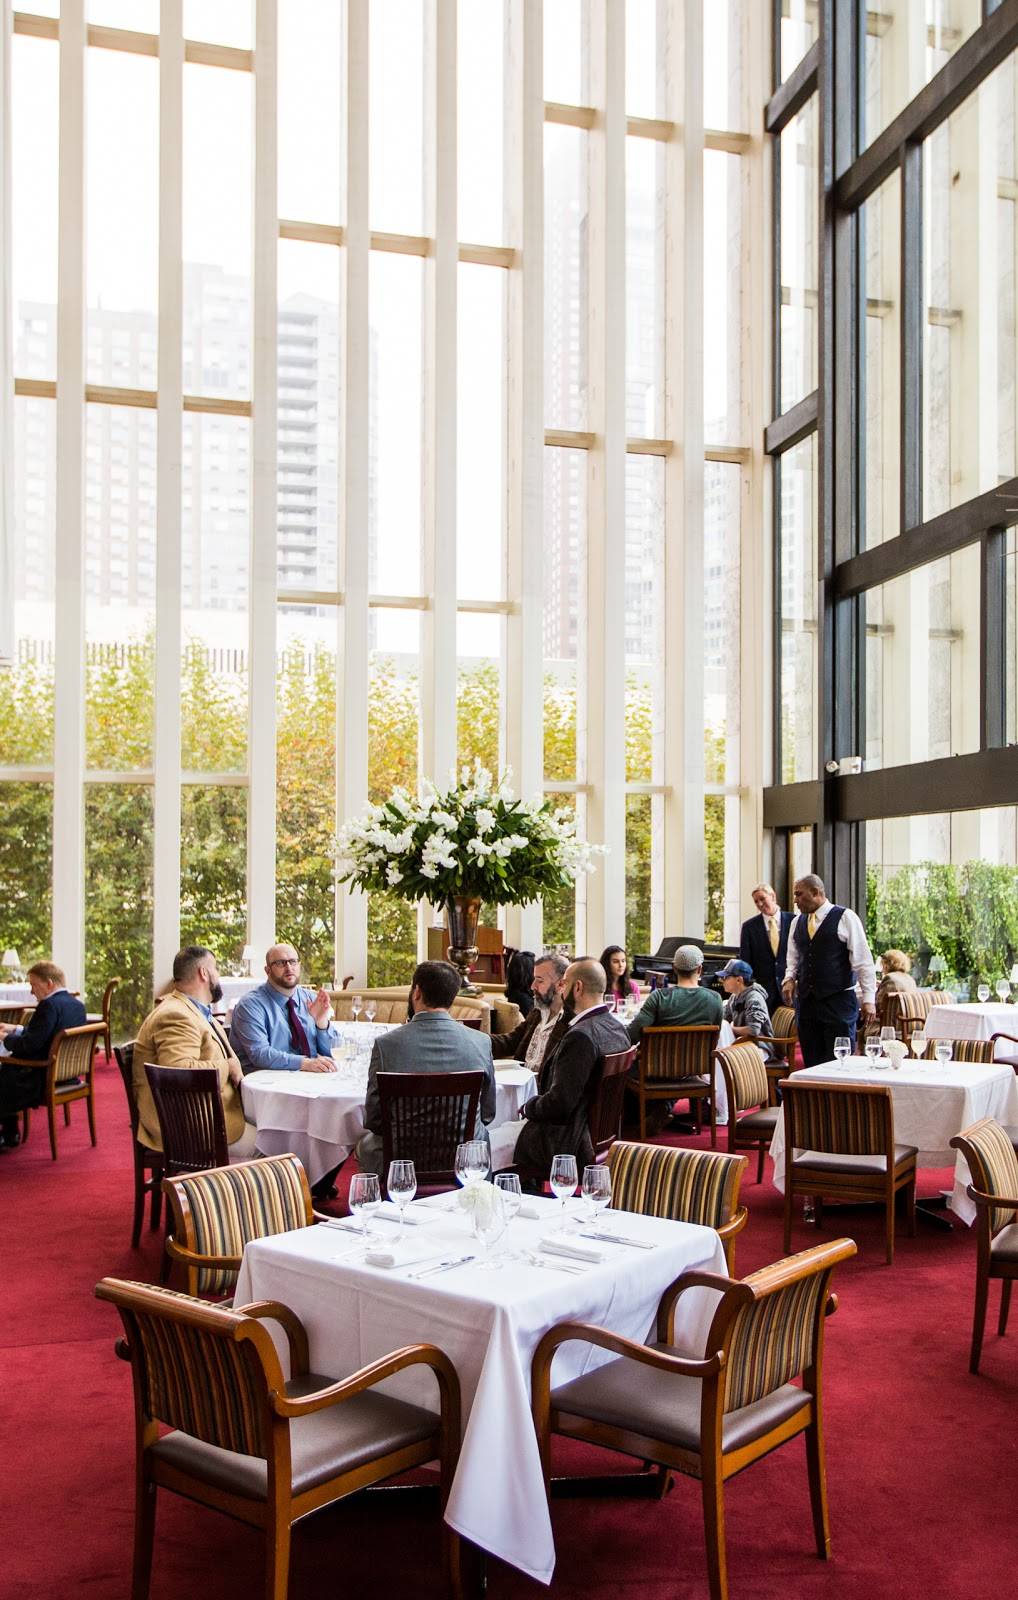 The Grand Tier | restaurant | 30 Lincoln Center Plaza, New York, NY 10023, USA | 2127993400 OR +1 212-799-3400